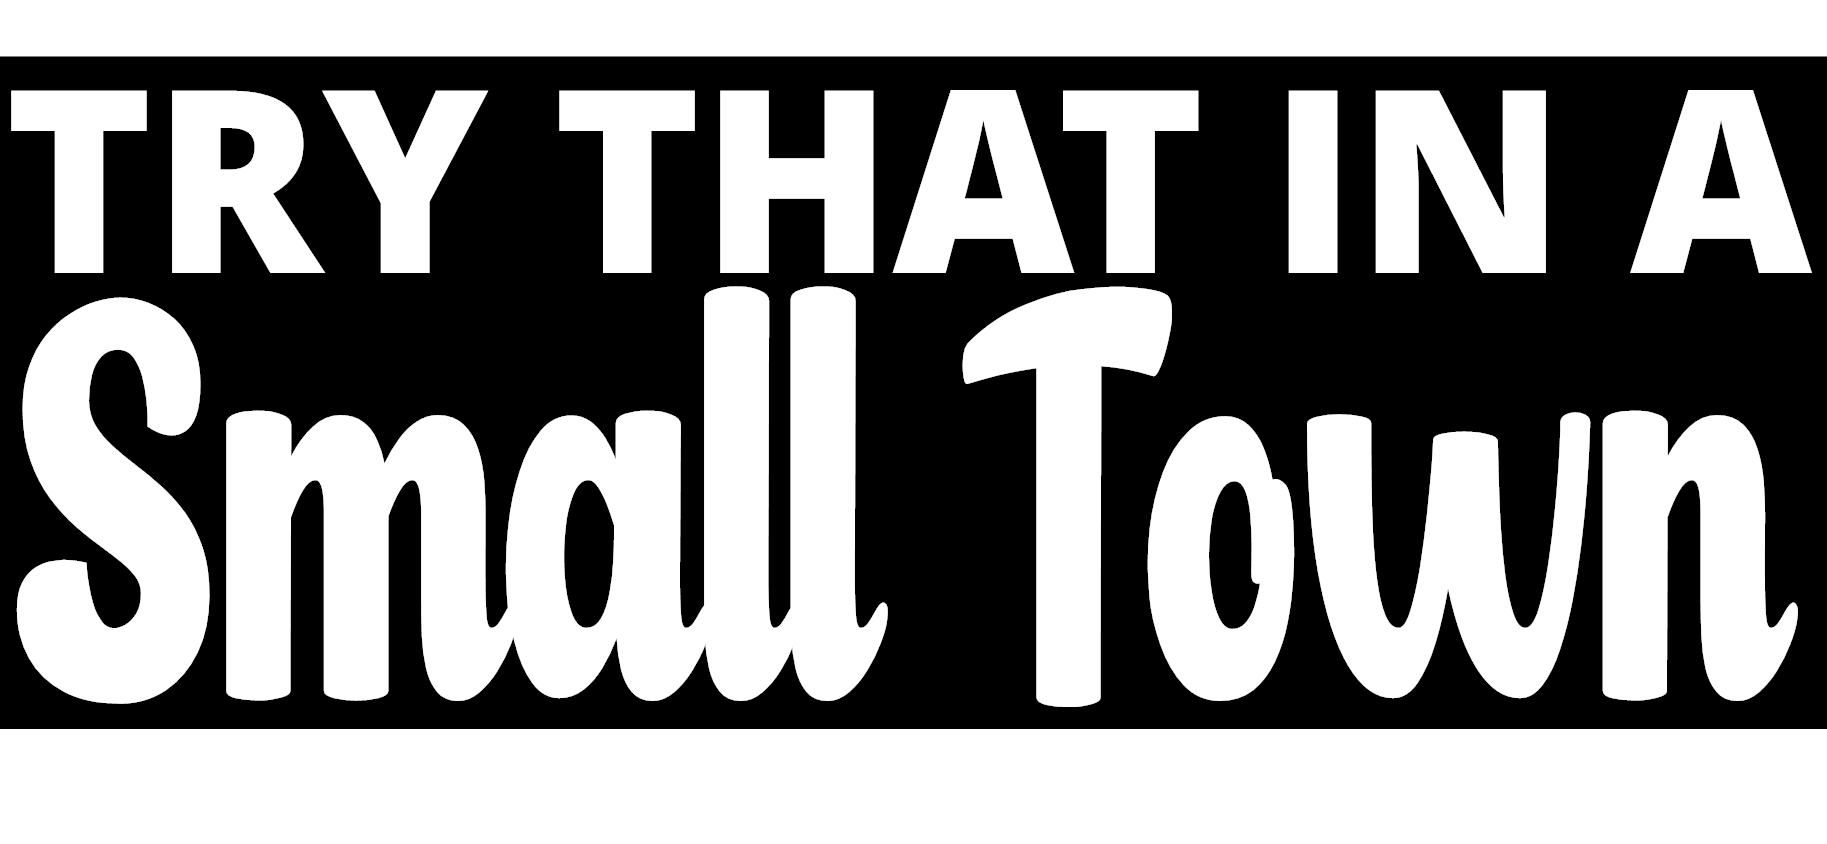 Try That In A Small Town Vinyl Decal - 6.3"x2.4"